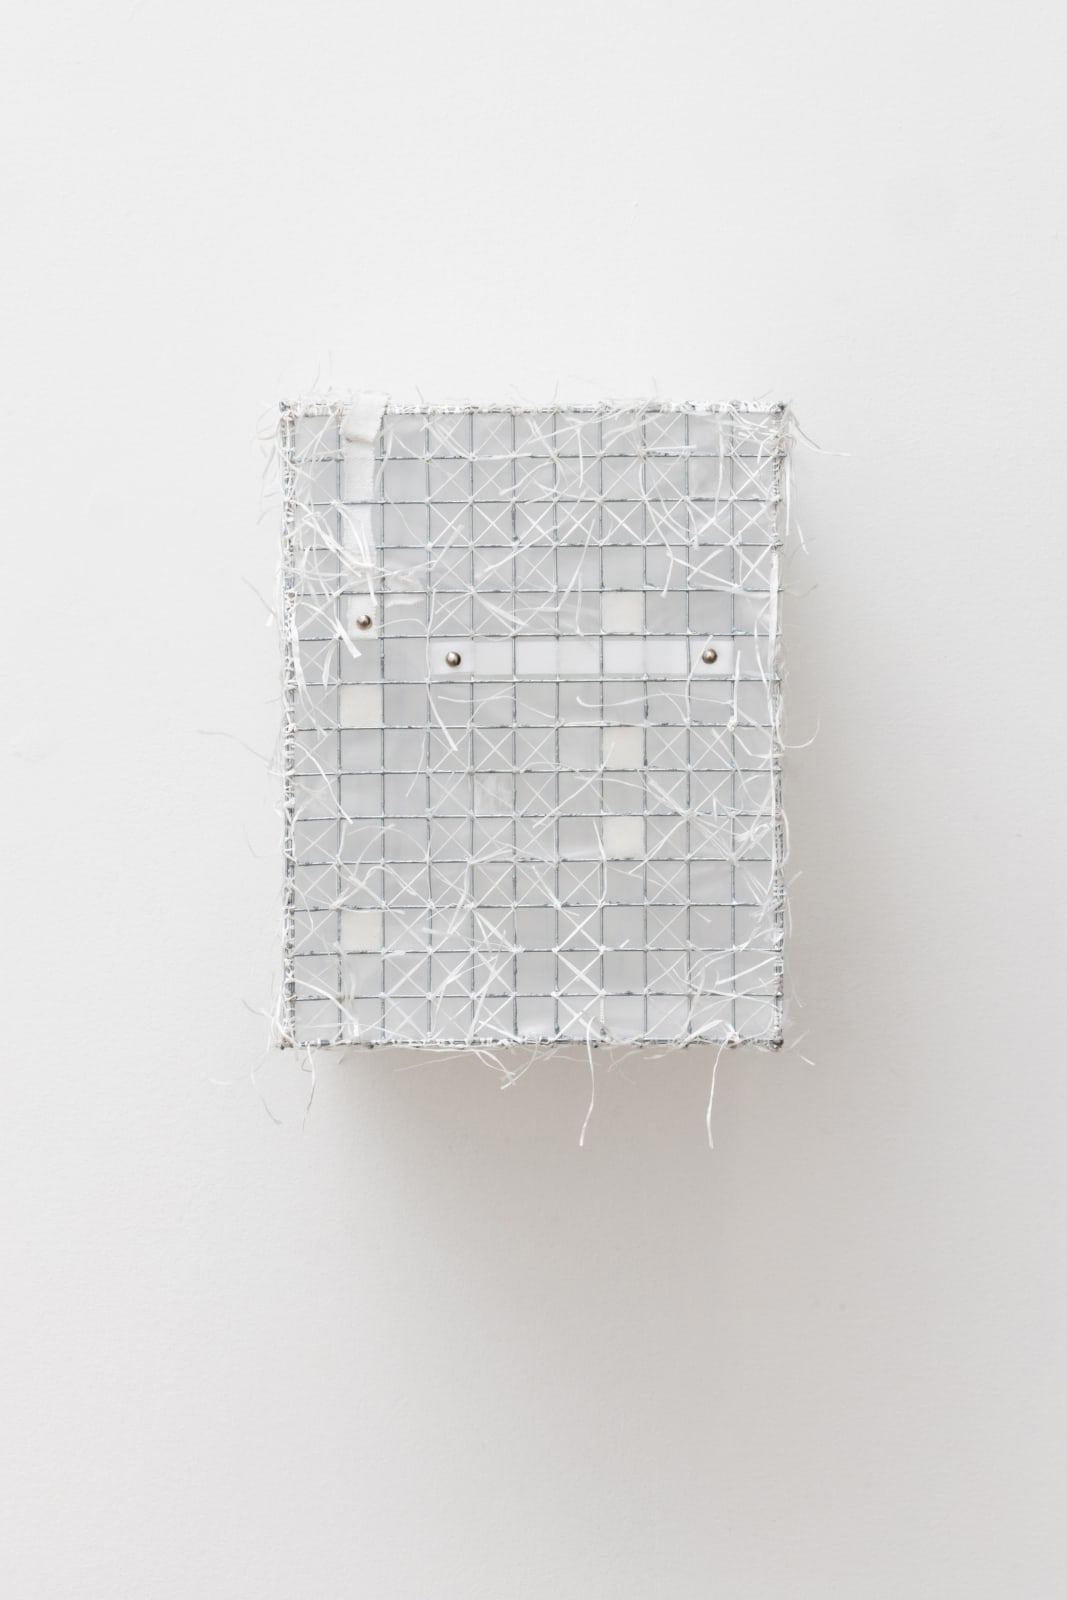 Wall-mounted sculpture of a wire rectangular care that is covered in white film, paper from receipts, envelopes, and dental floss